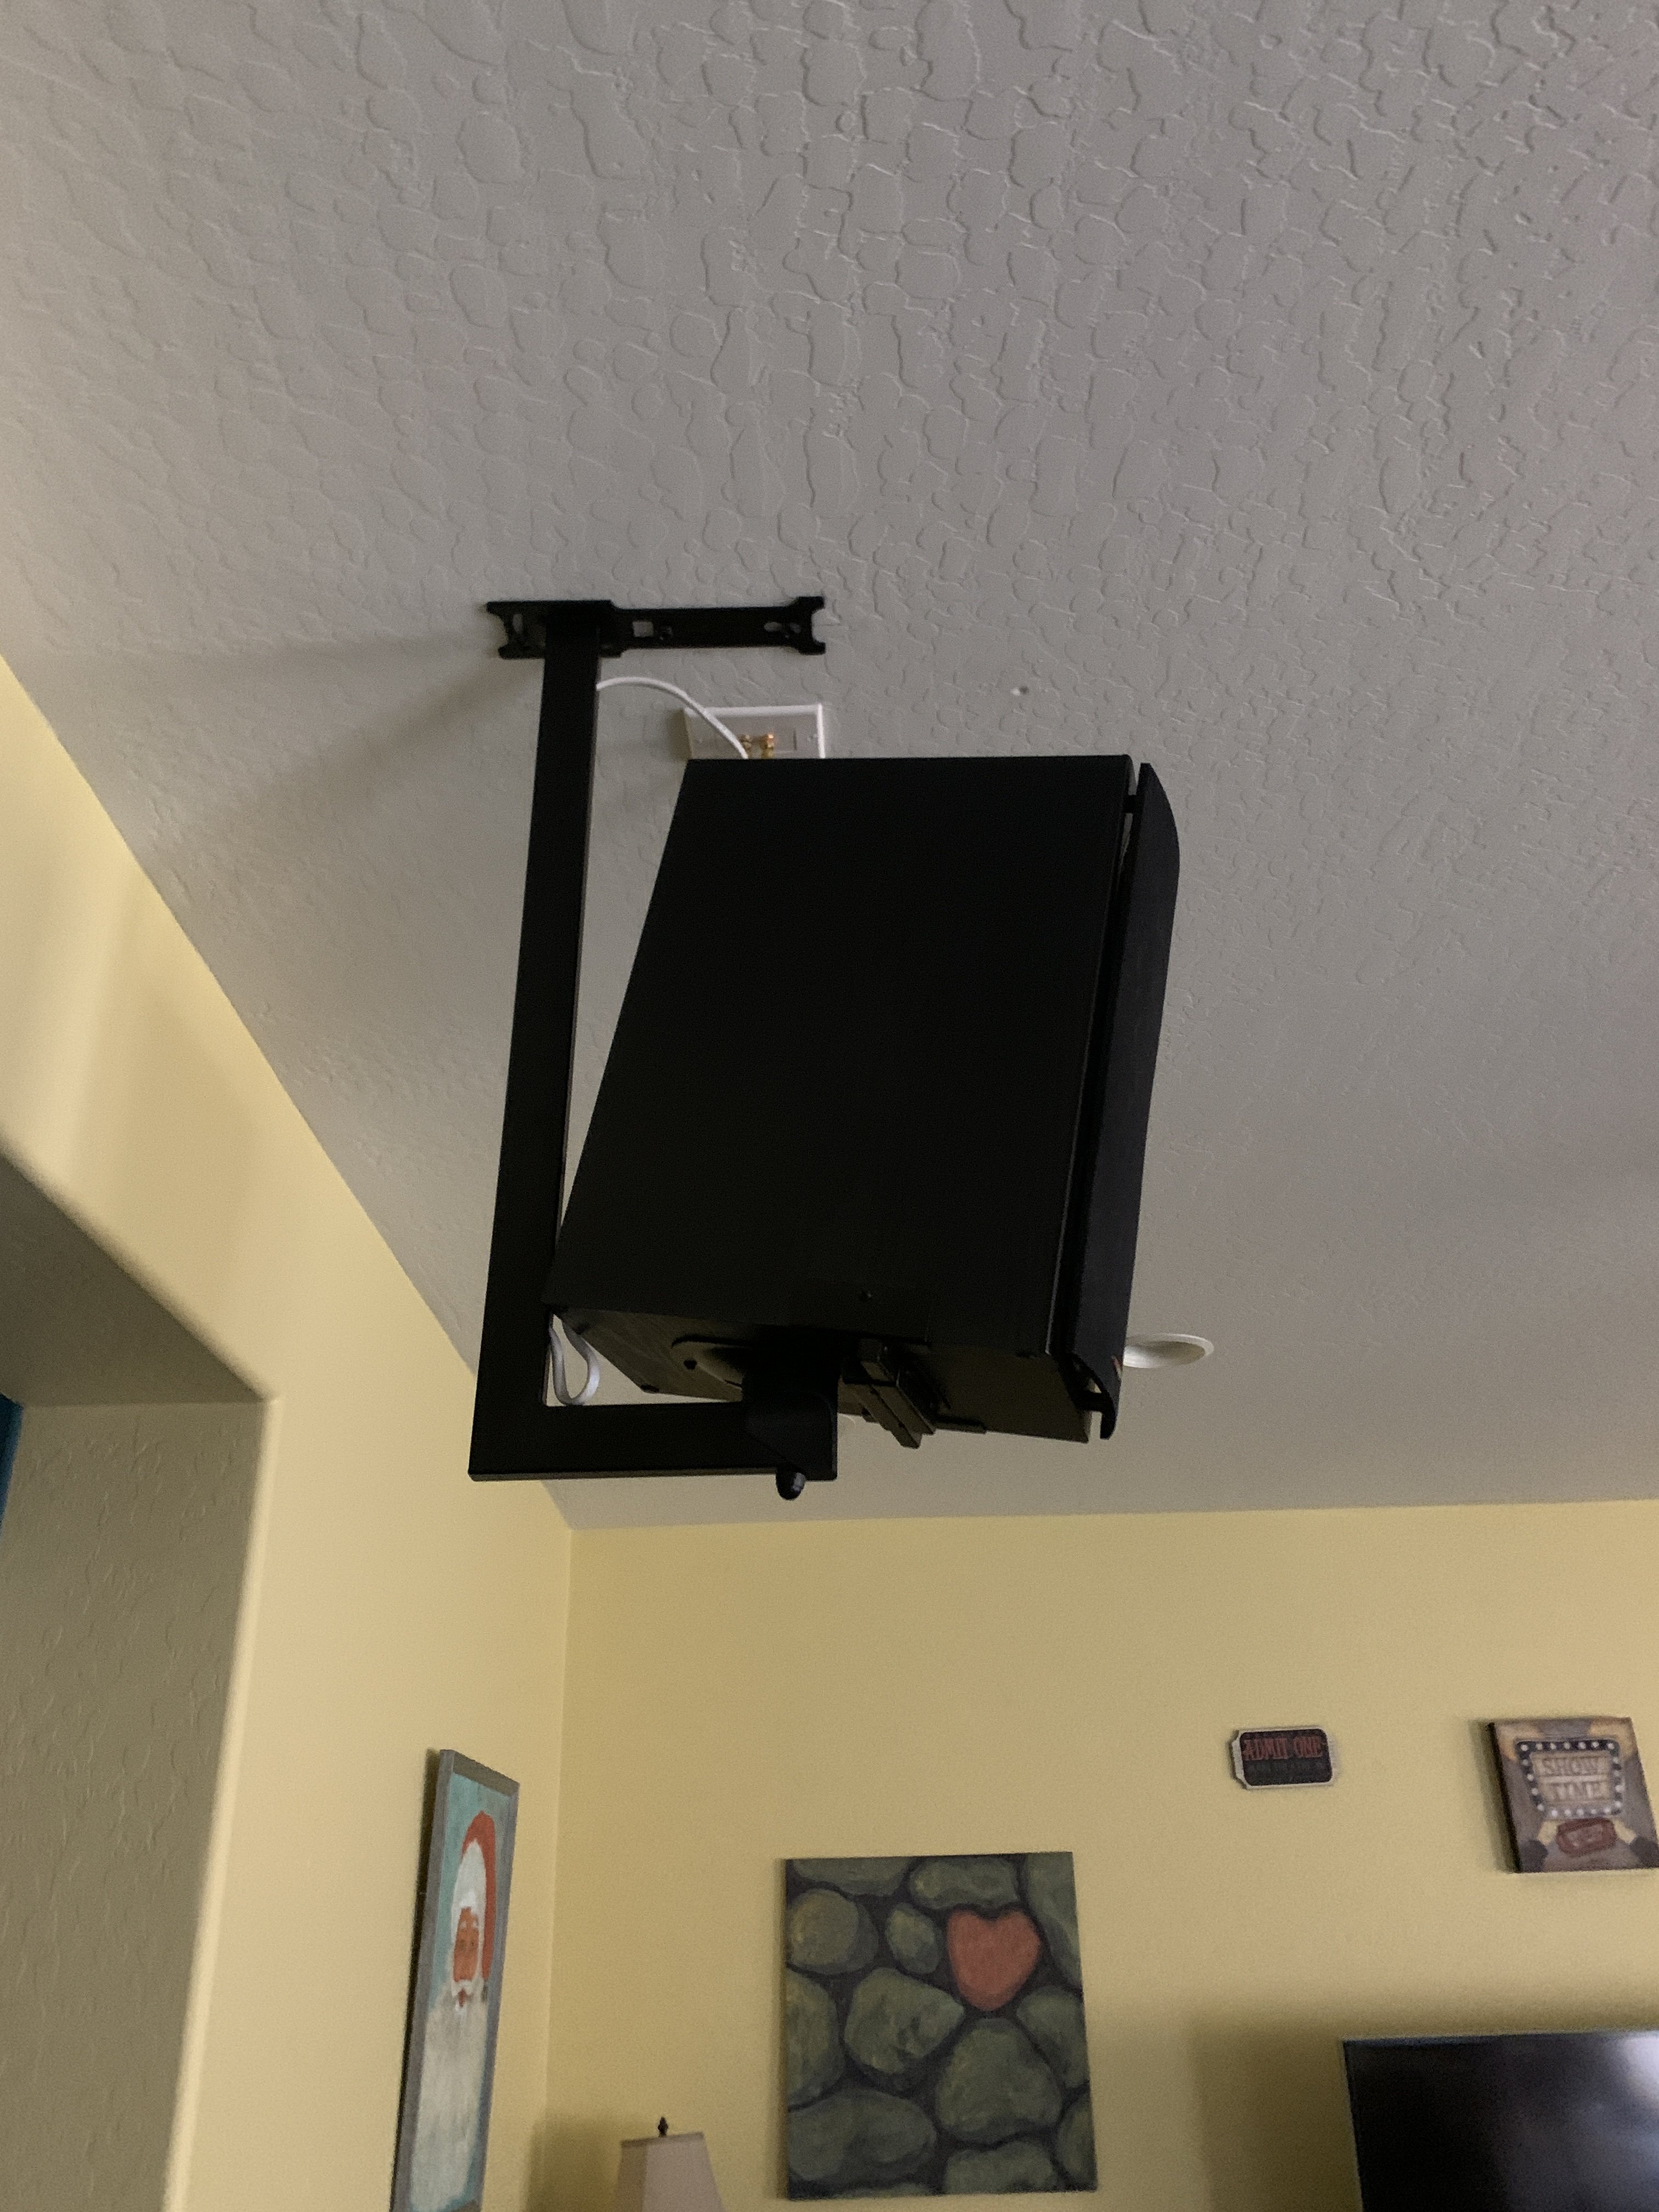 Ceiling Mounting Bookshelf Speakers, Mounting Surround Sound Speakers Near Ceiling